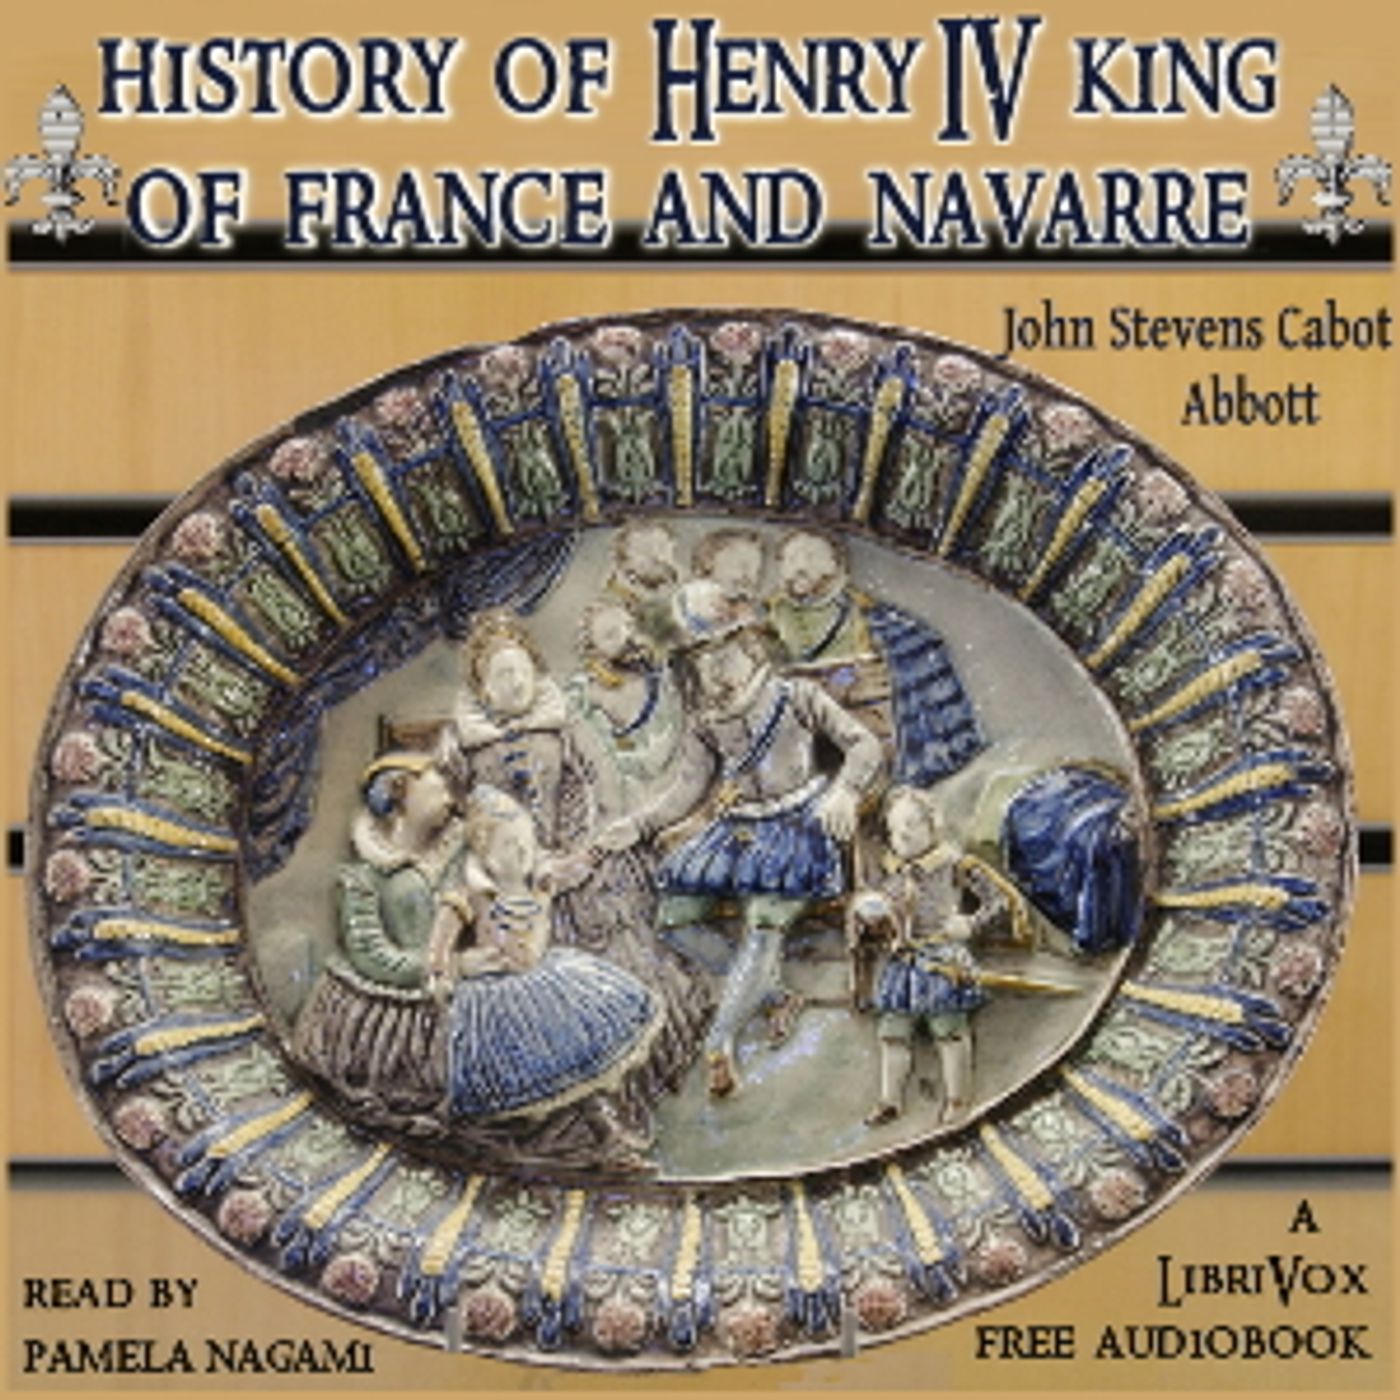 History of Henry the Fourth King of France and Navarre by John Stevens Cabot Abbott (1805 – 1877)